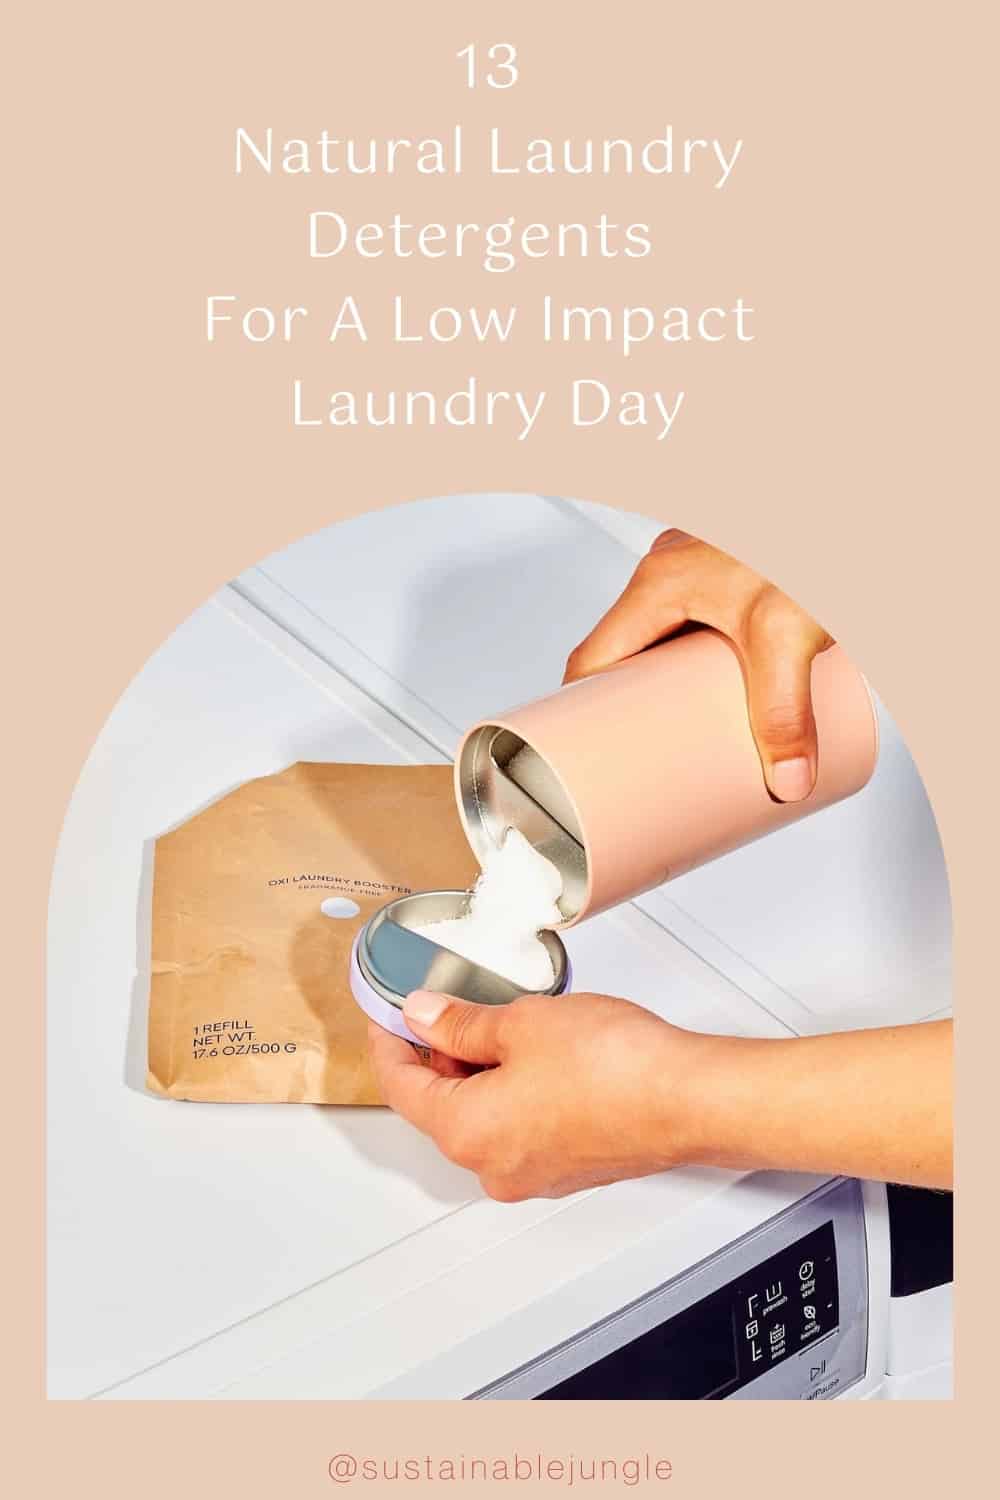 Natural Laundry Detergents For A Low Impact Laundry Day #naturallaundrydetergents #bestnaturallaundrydetergents #naturallaundrydetergentbrands #organiclaundrydetergents #nontoxiclaundrydetergents #sustainablejungle Image by Blueland